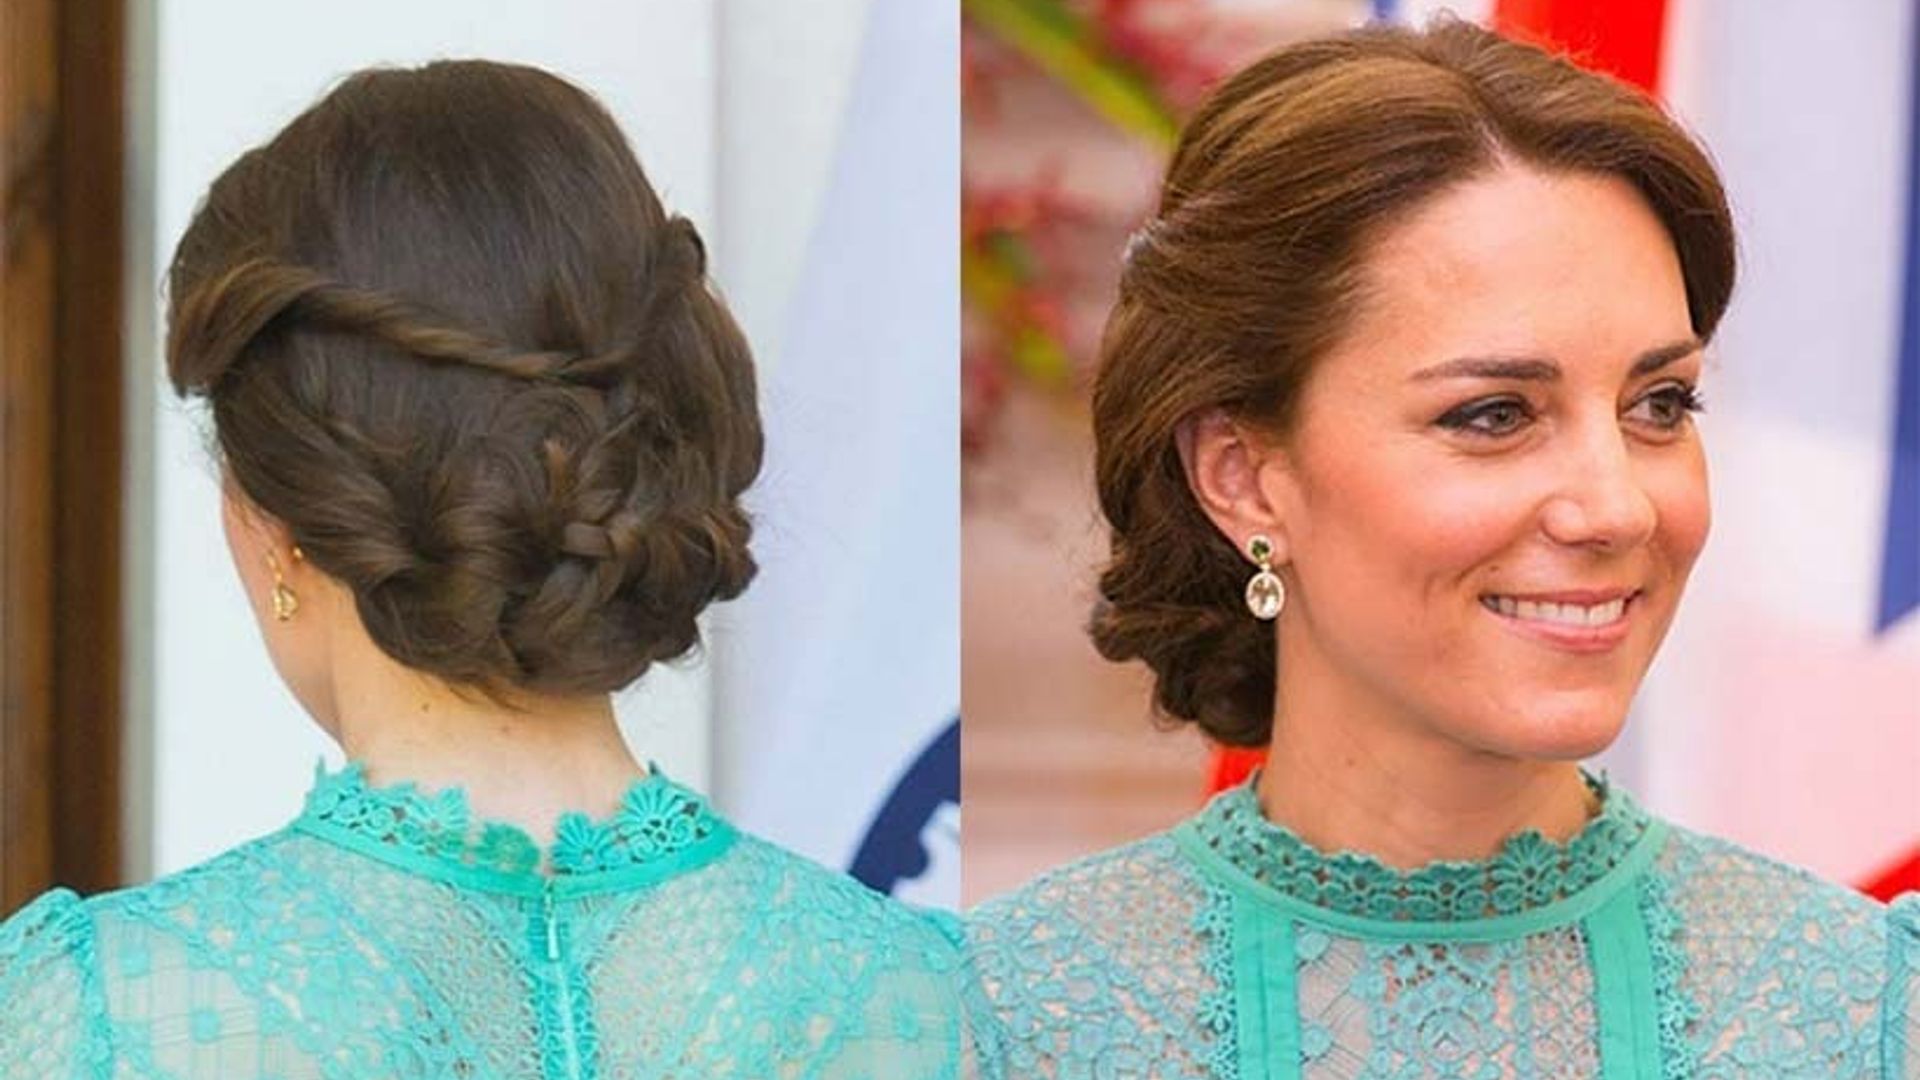 How To Get Kate Middleton's Intricate Up Dos